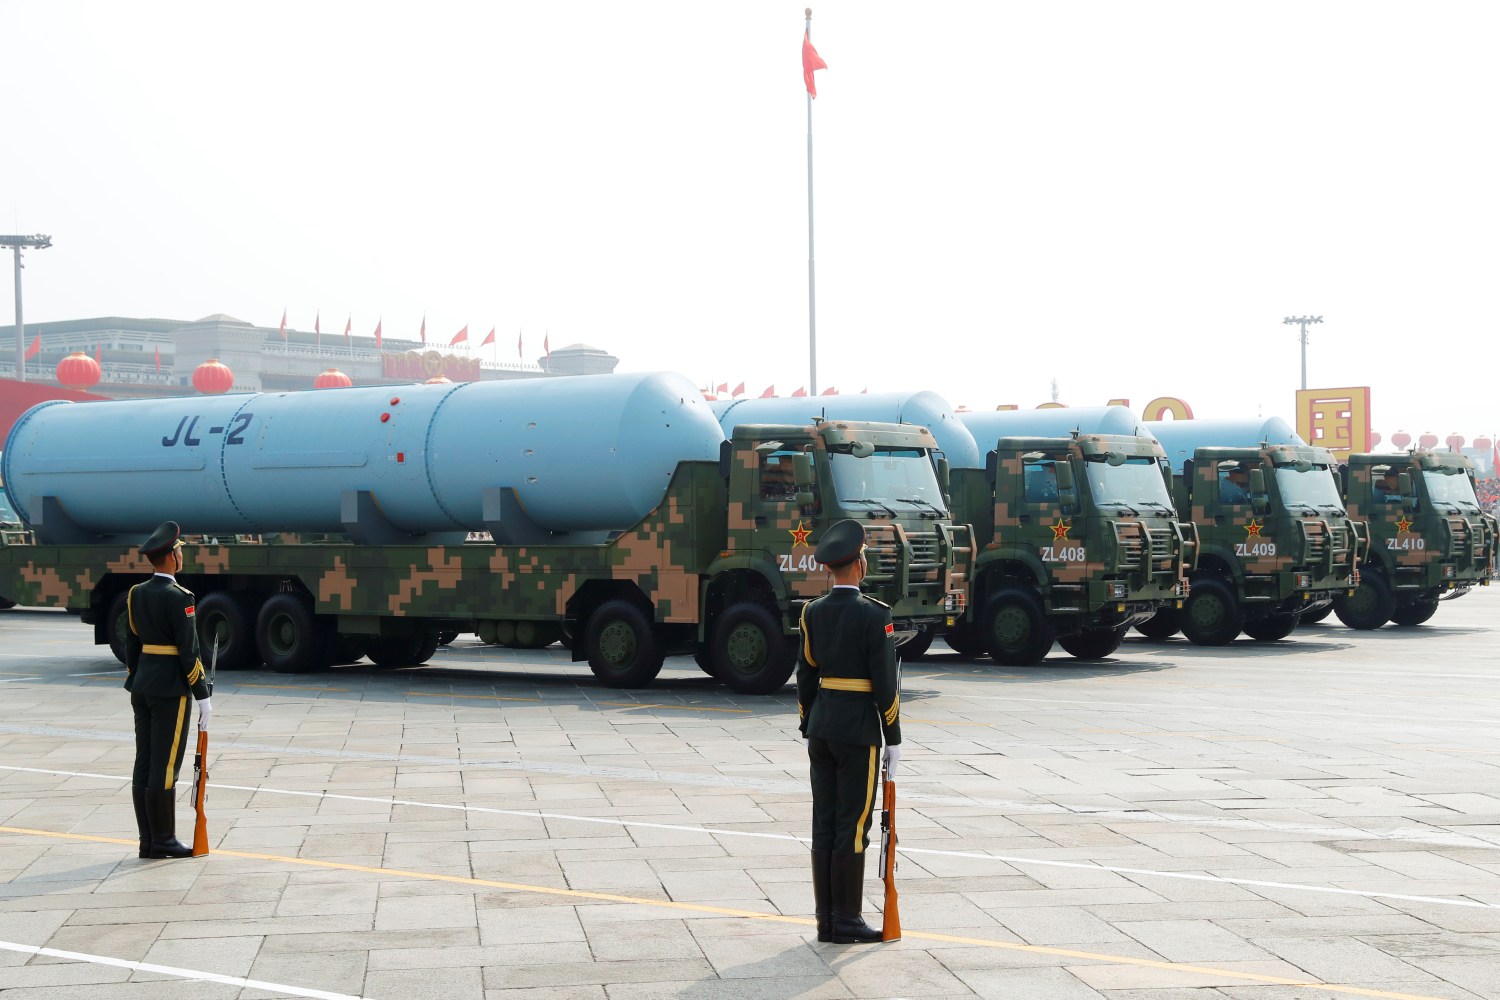 Military vehicles carrying JL-2 submarine launched ballistic missiles drive past Tiananmen Square during the military parade marking the 70th founding anniversary of People's Republic of China, on its National Day in Beijing, China October 1, 2019.  REUTERS/Thomas Peter